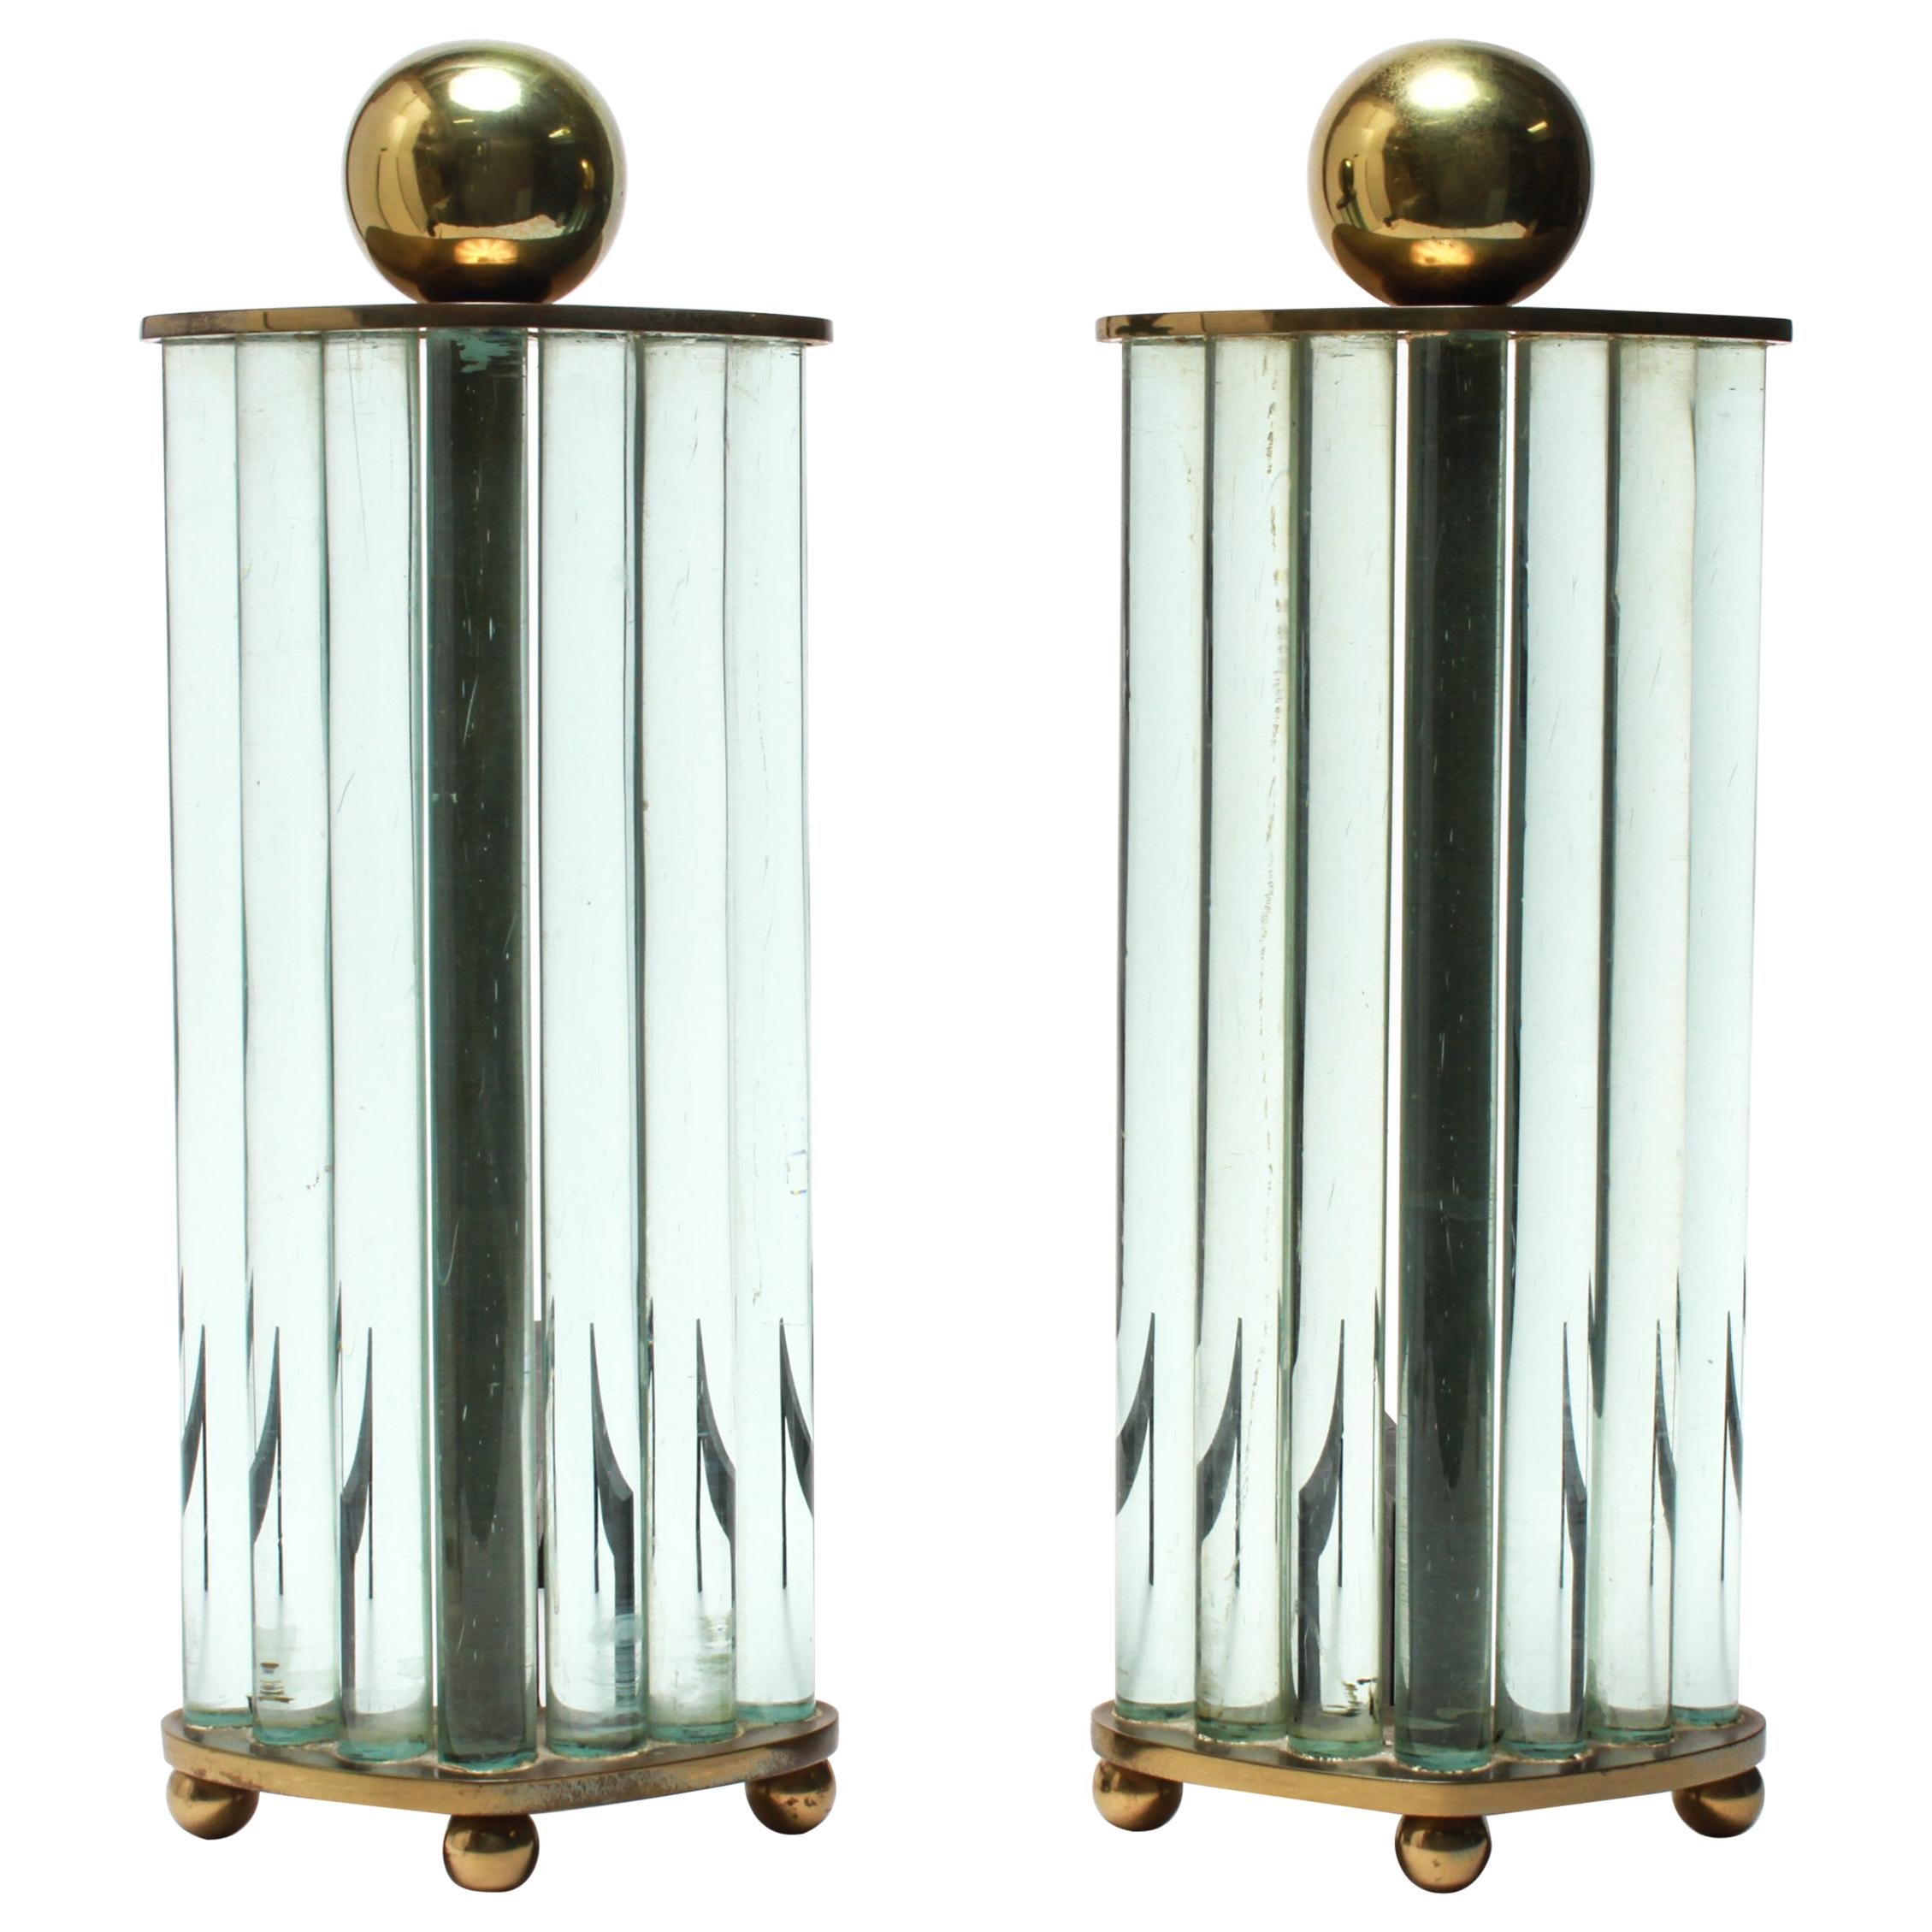 William H. Jackson Company Modernist Brass and Glass Andirons